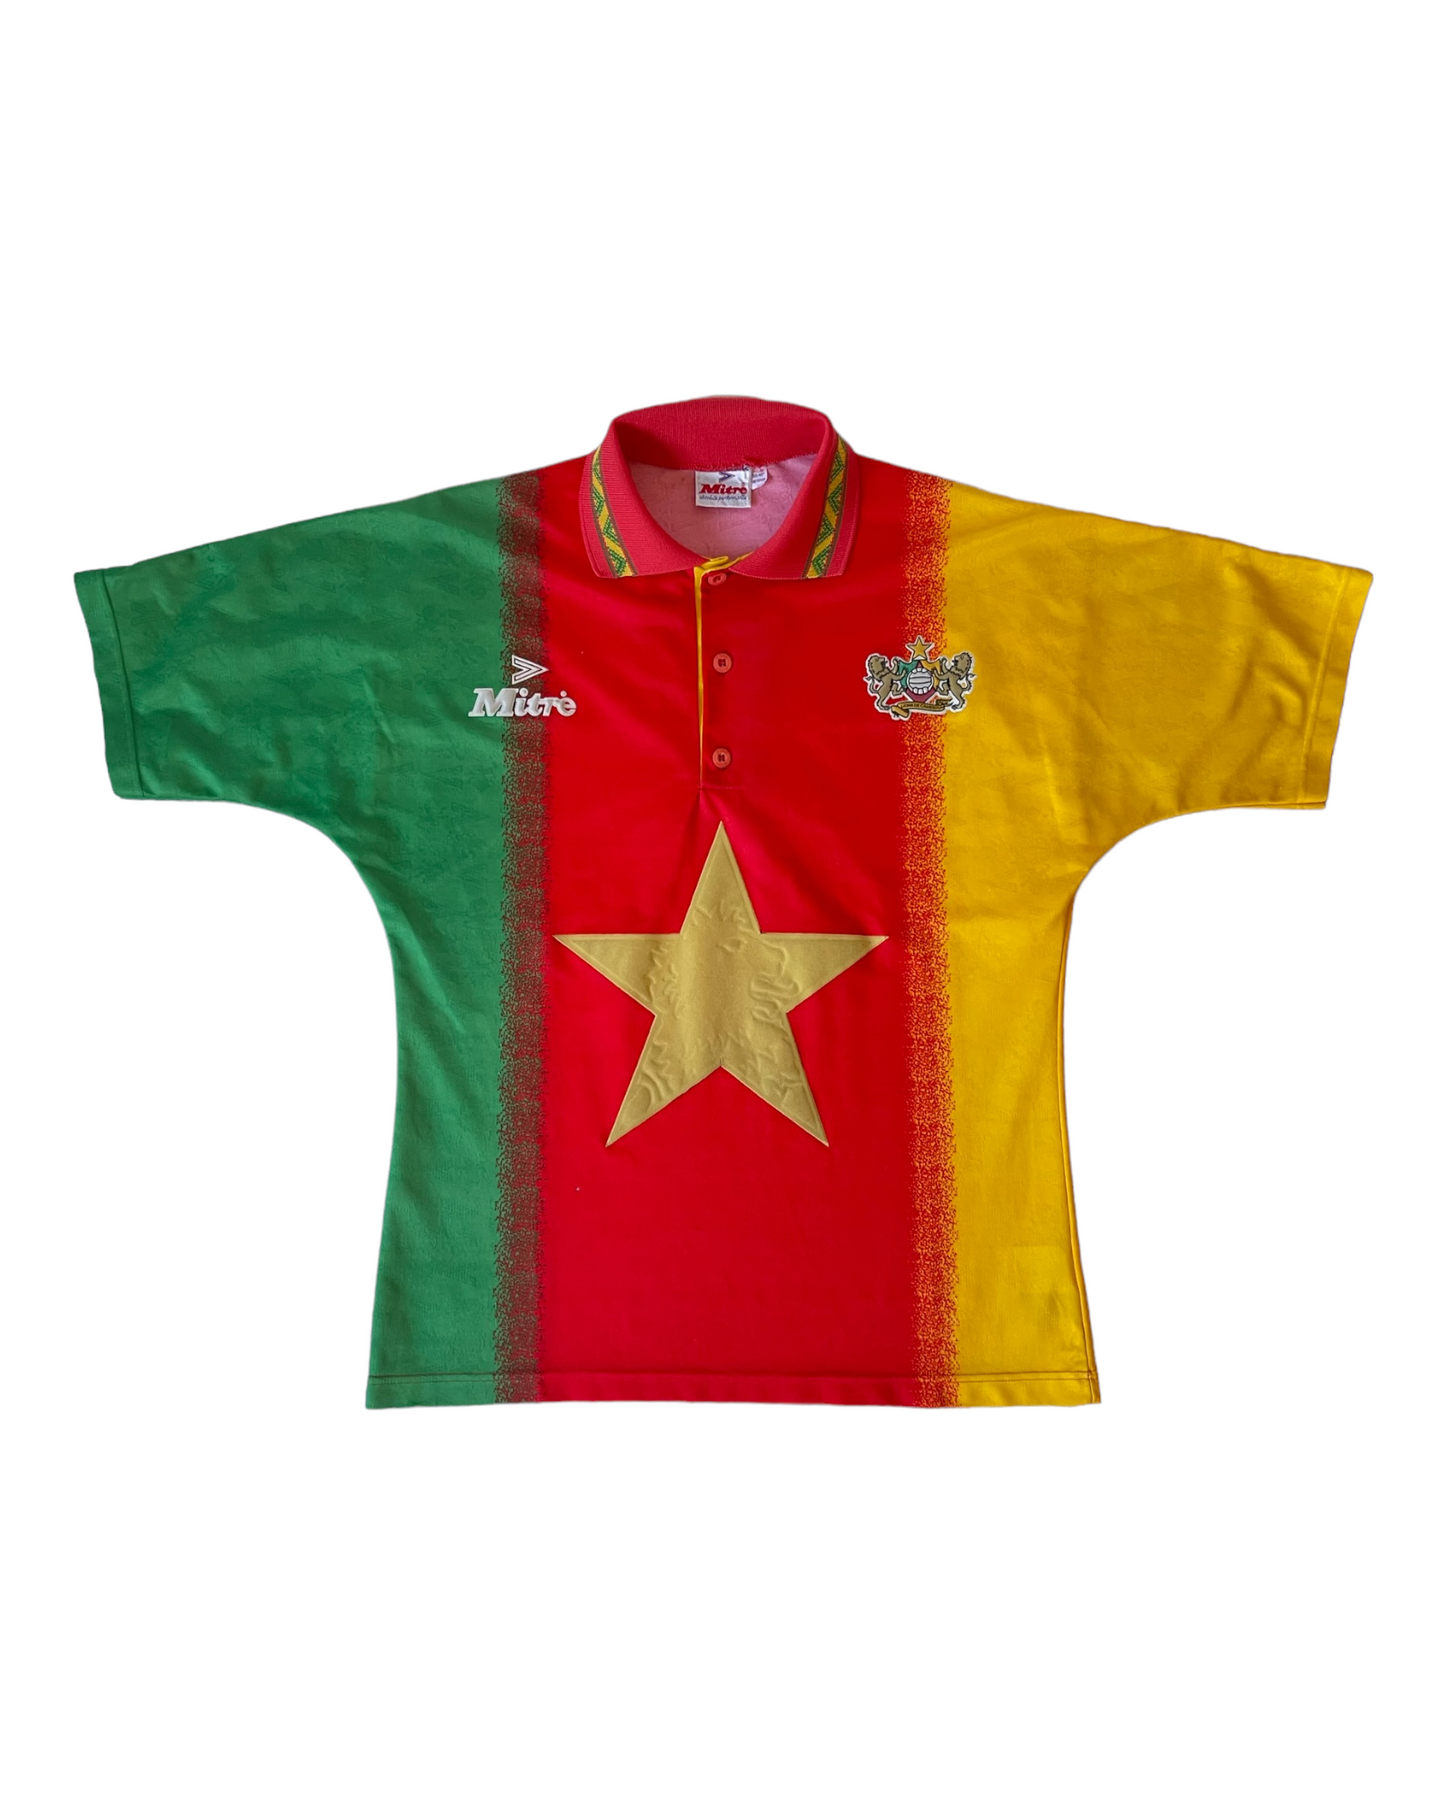 Vintage Cameroon Mitre 1994 - 1995 Home Football Shirt Size M Red Yellow Green Made in UK